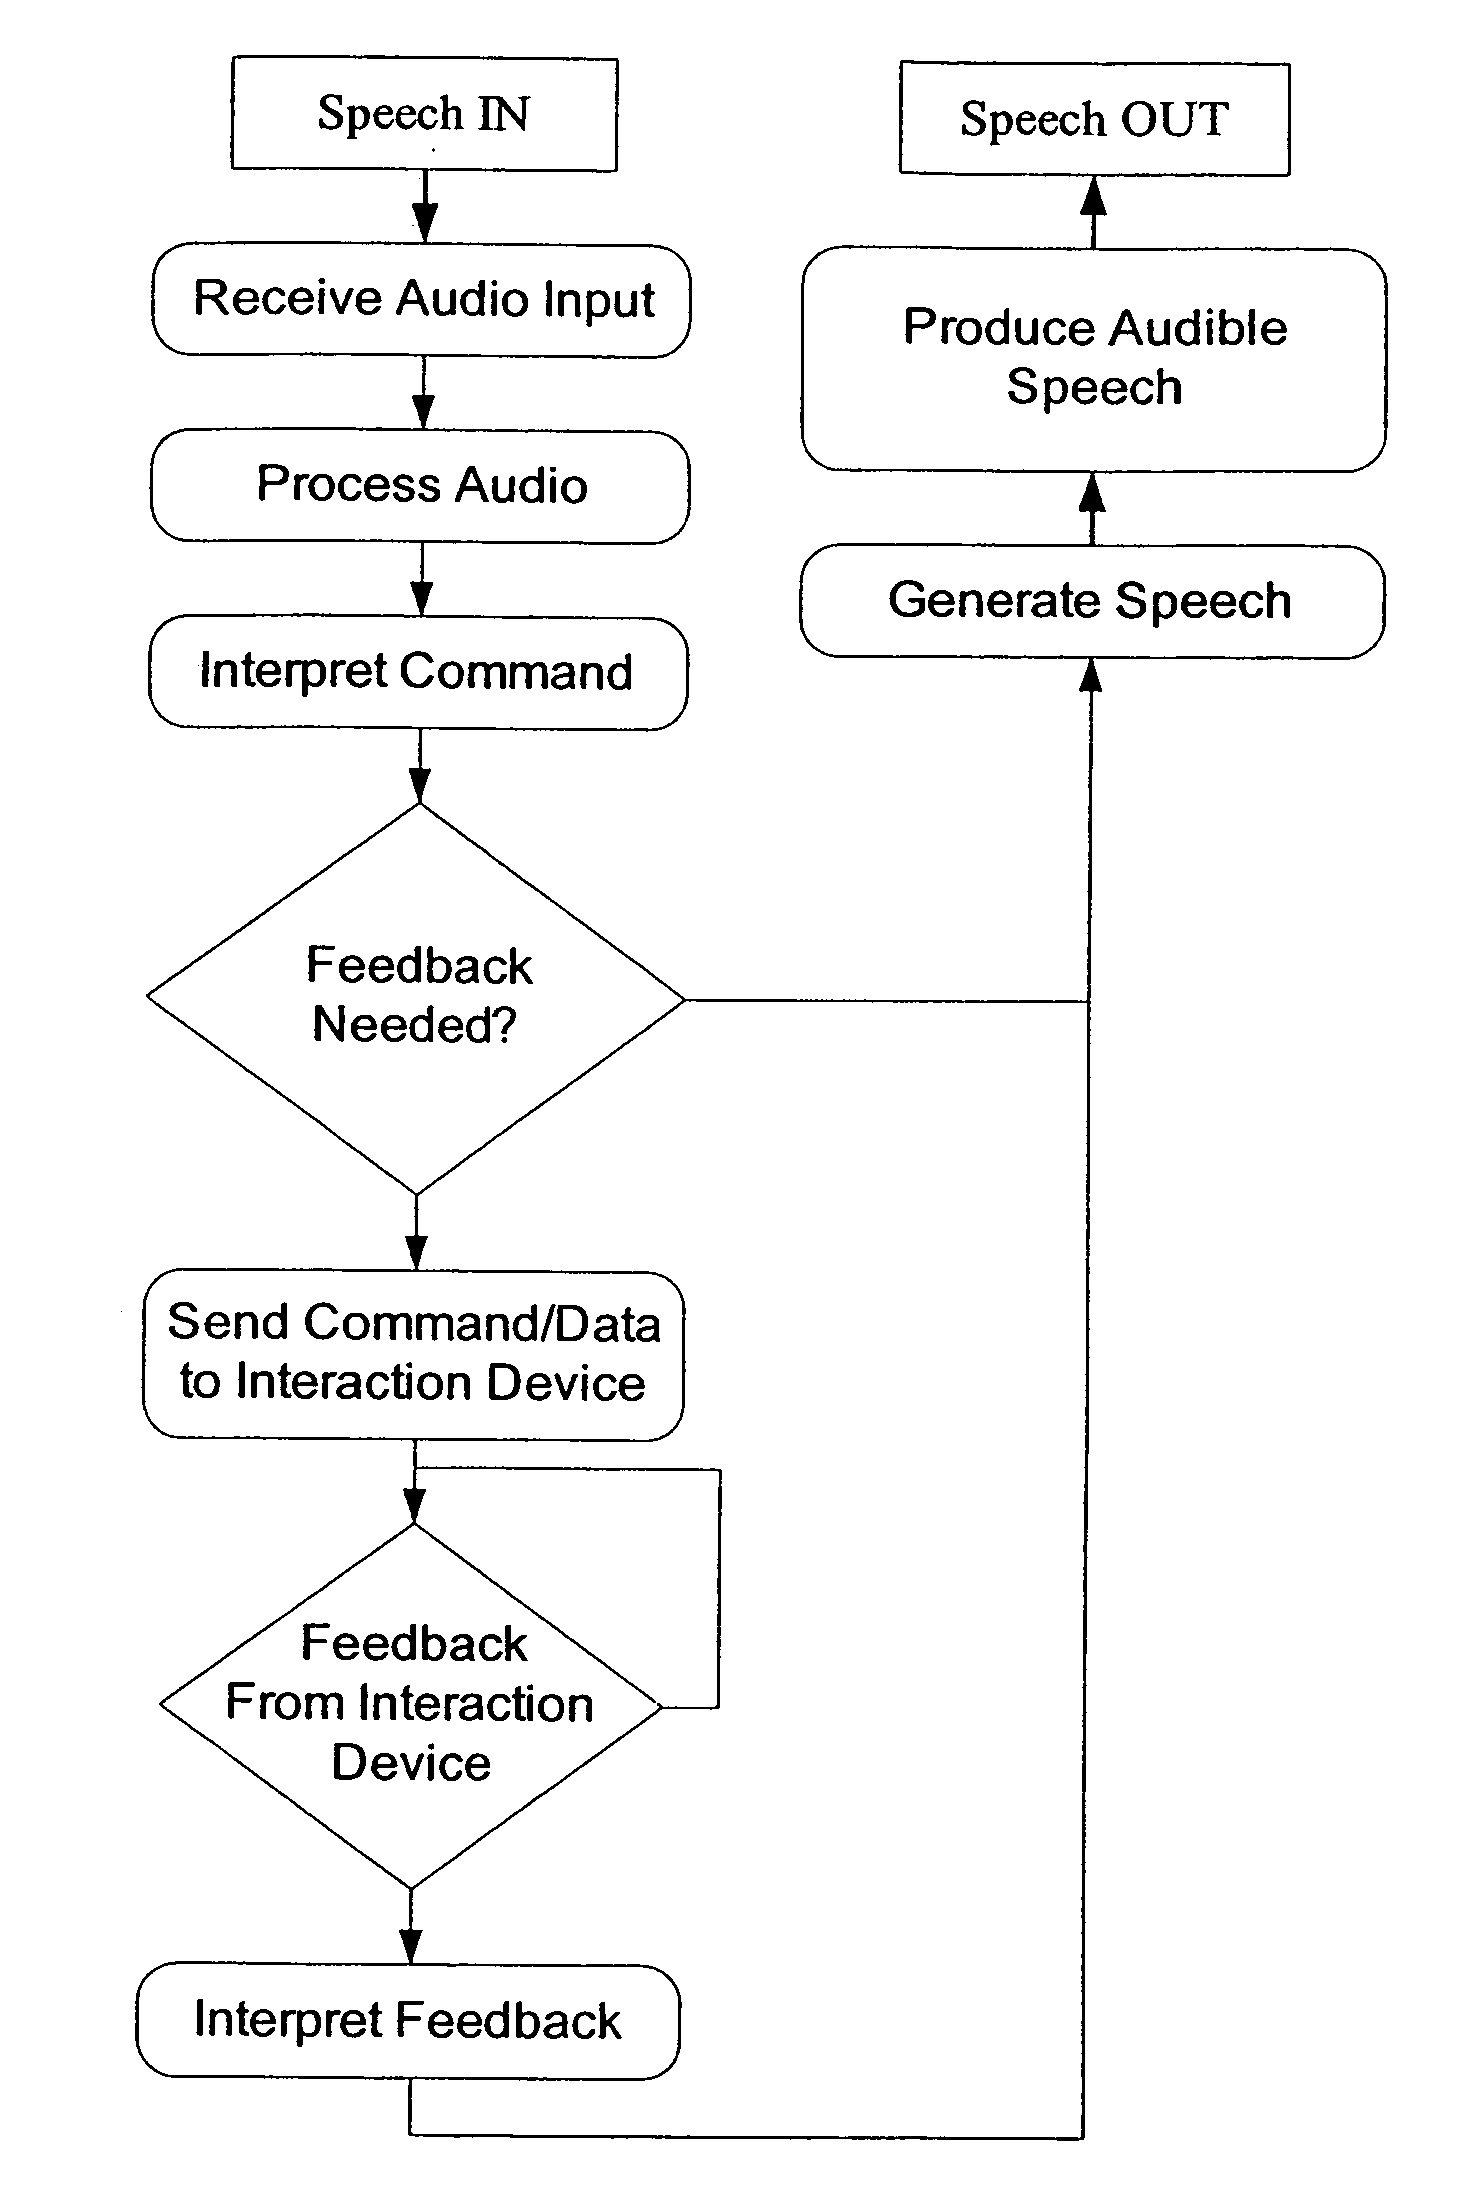 Audio appliance with speech recognition, voice command control, and speech generation